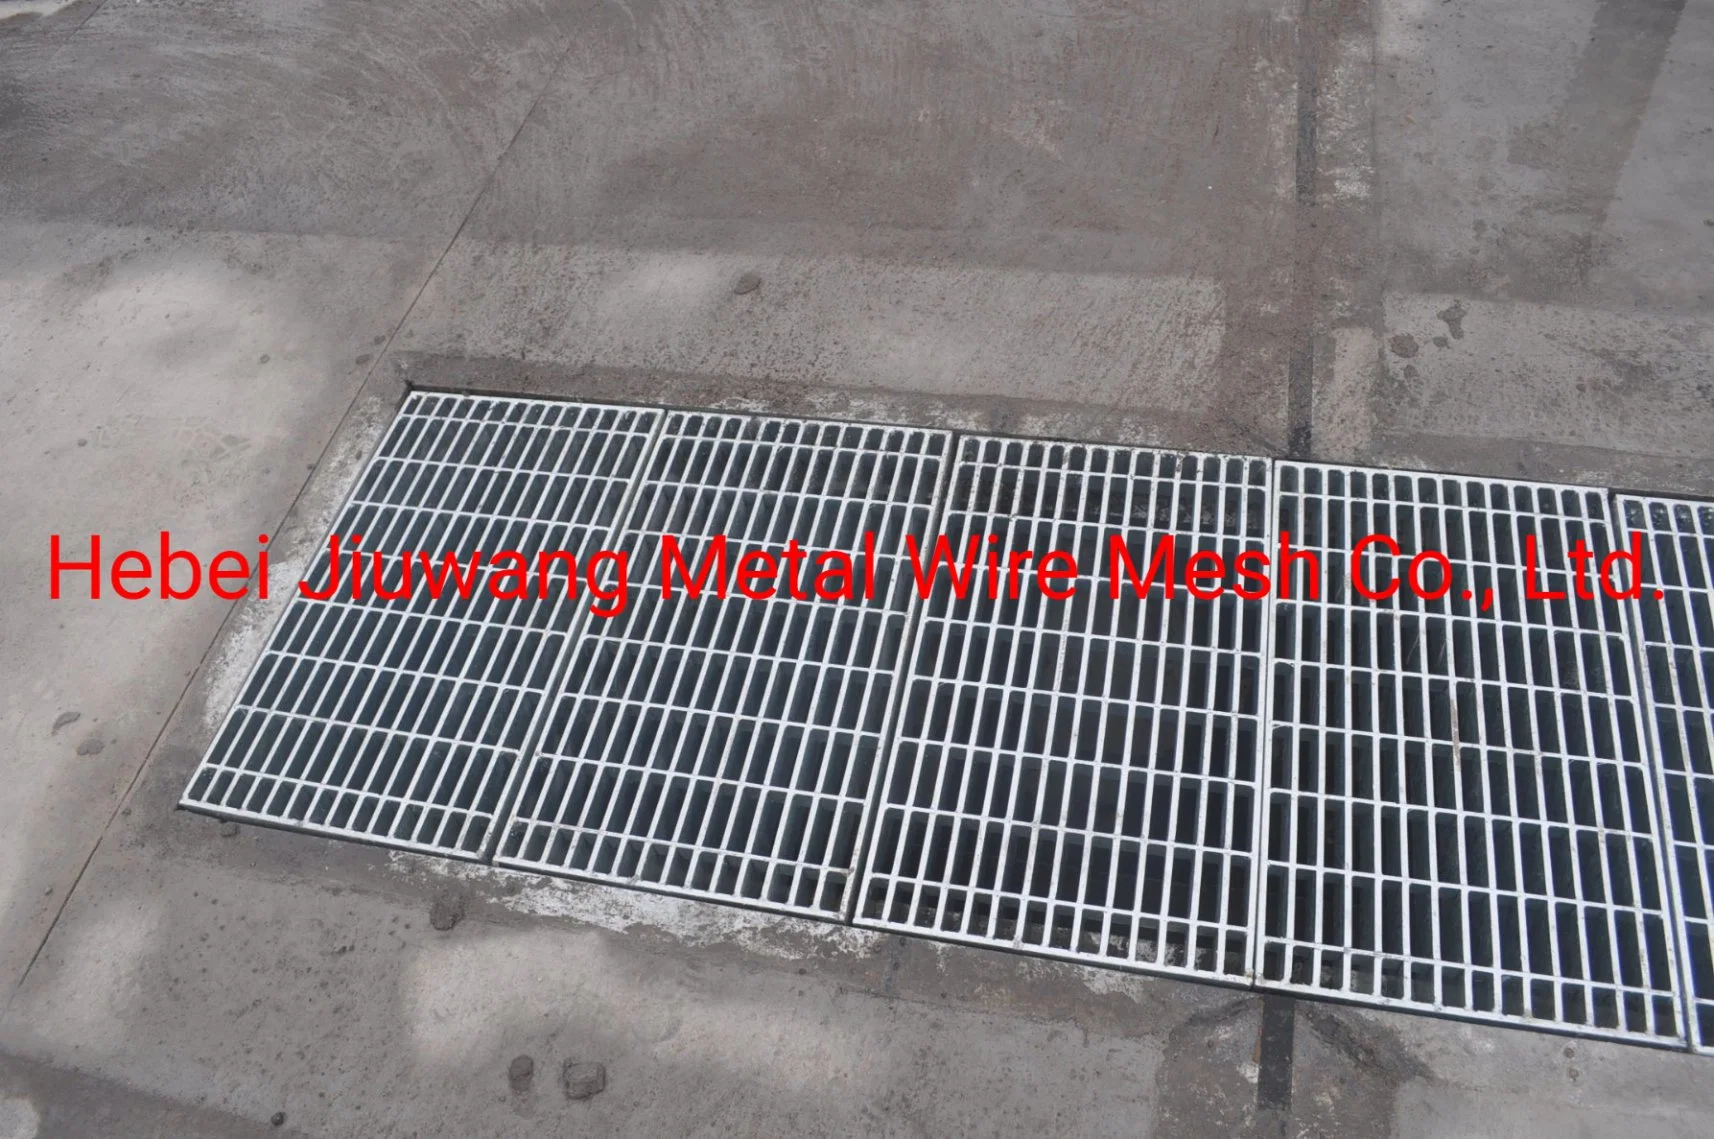 Drainage Grid Covers for Car Washing Station Steel Drainage Cover Steel Manhole Cover